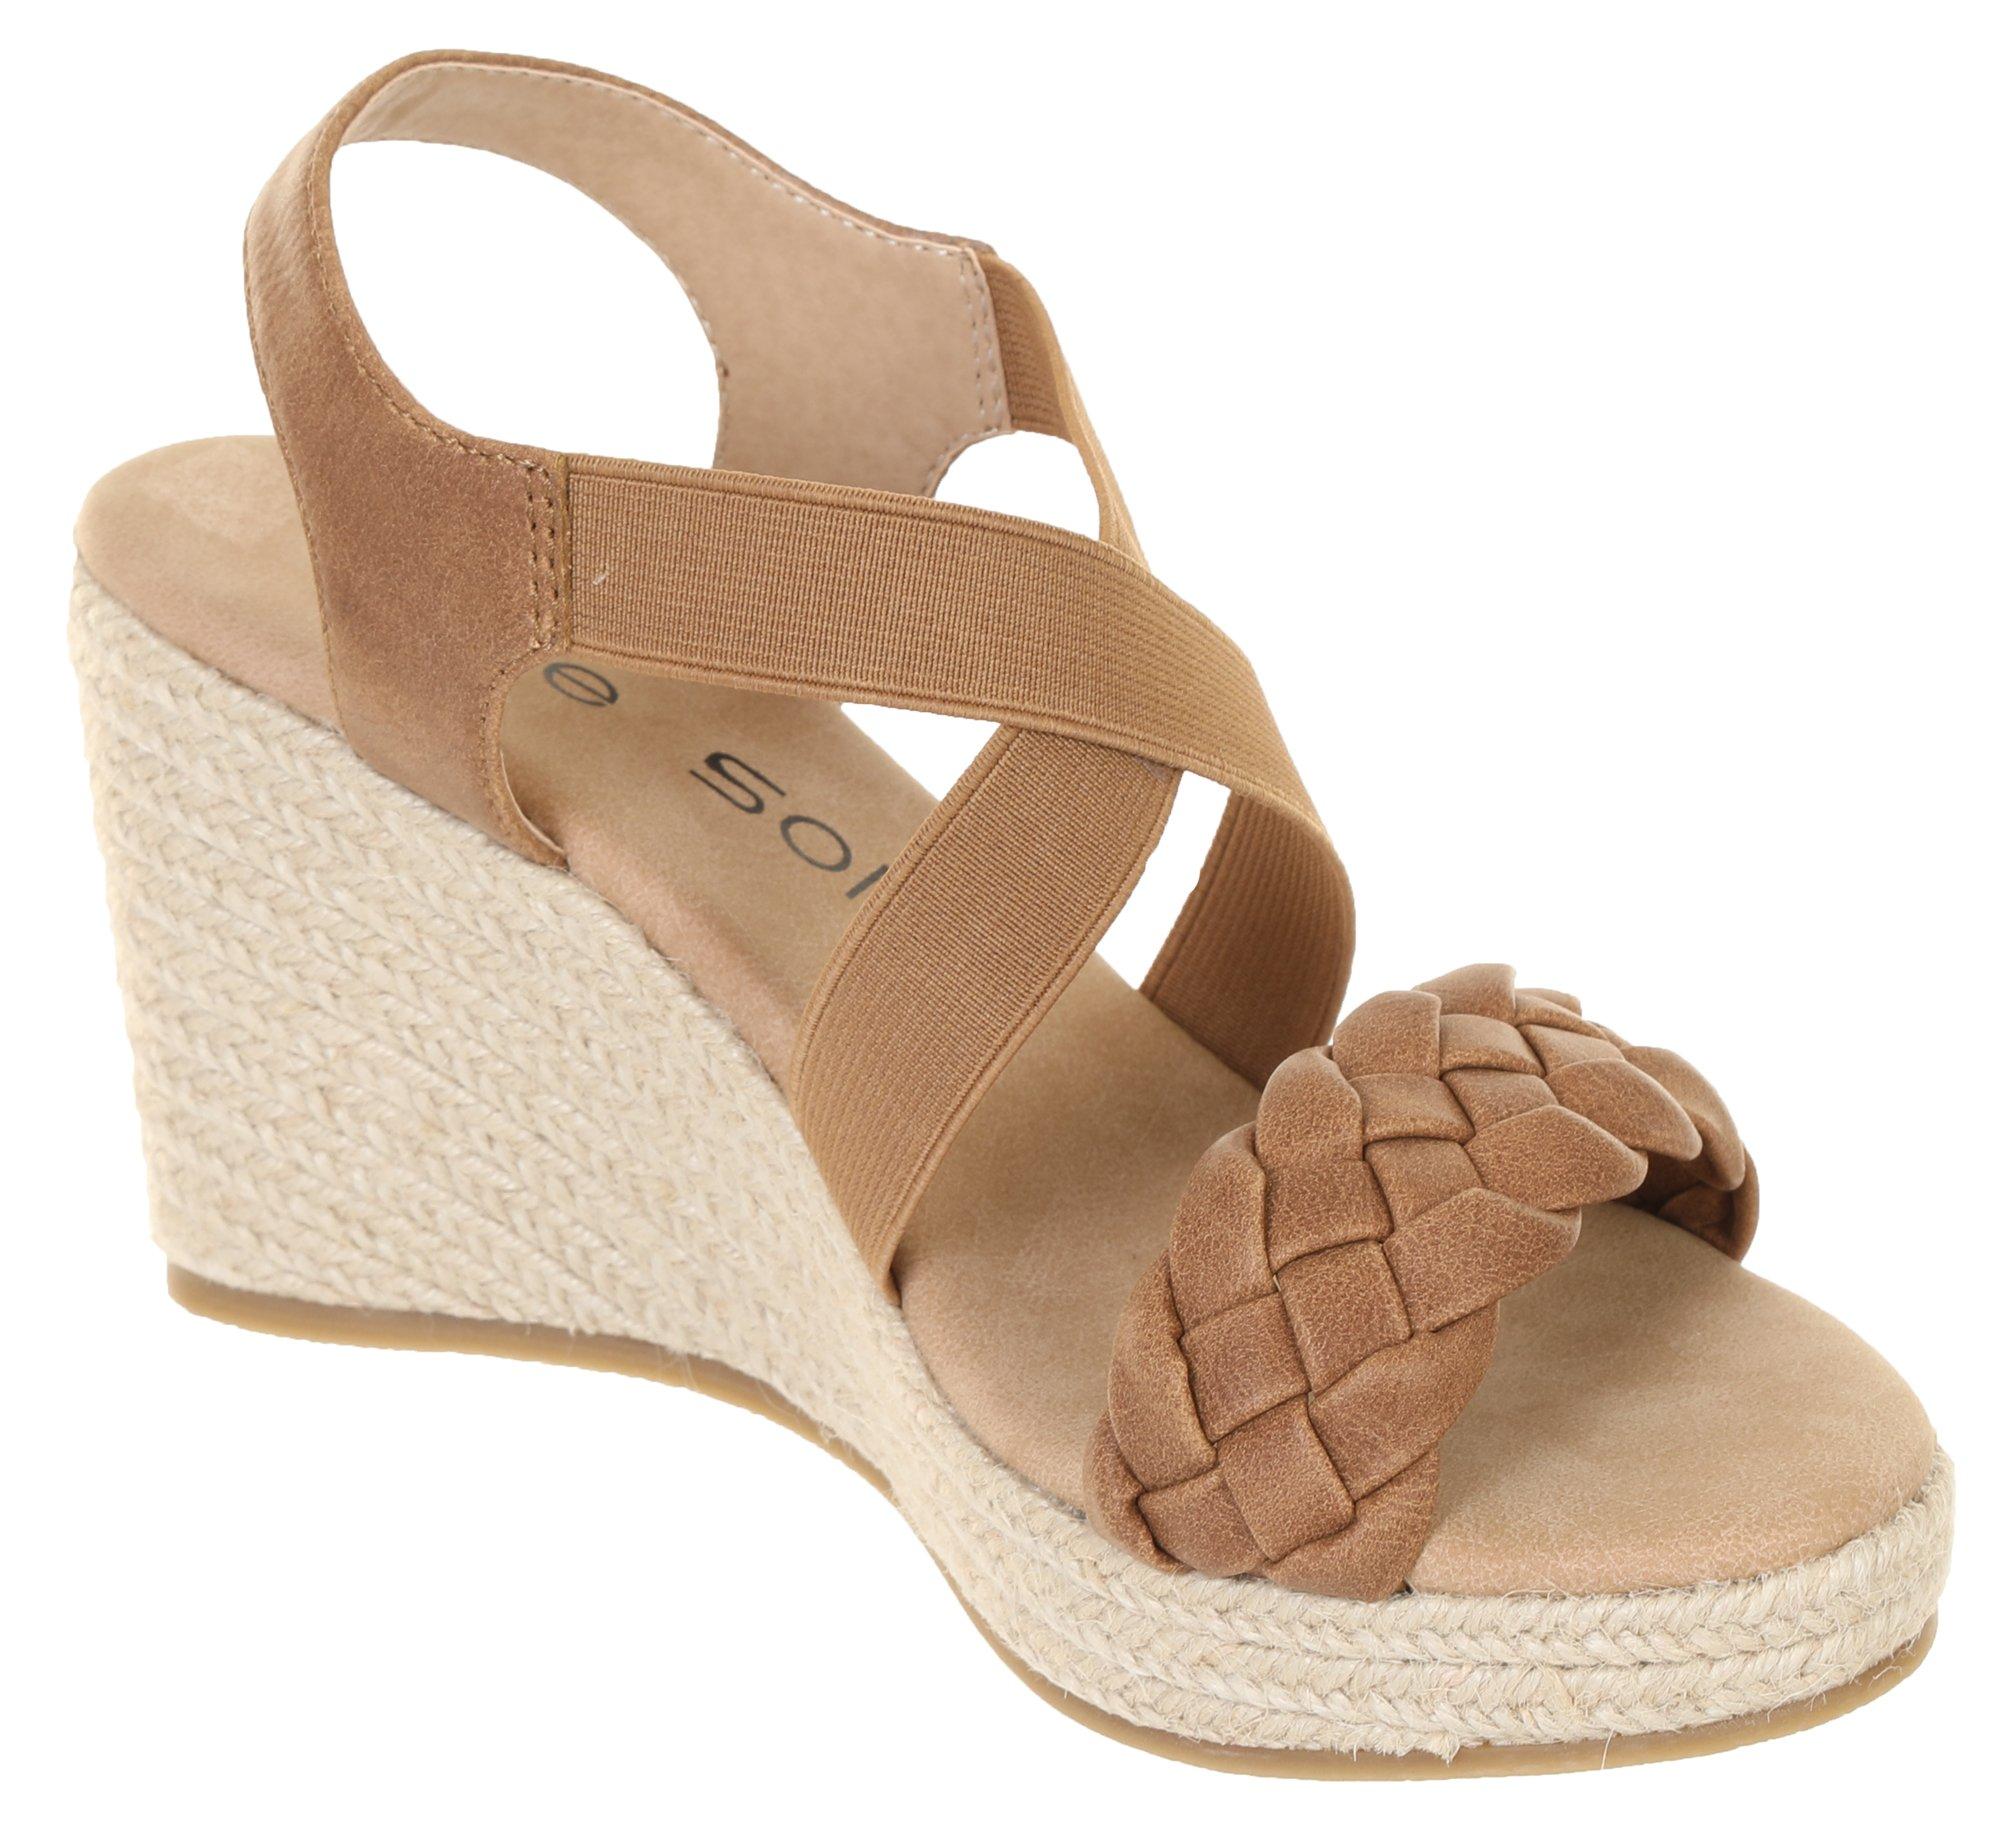 Womens Camille Wedges